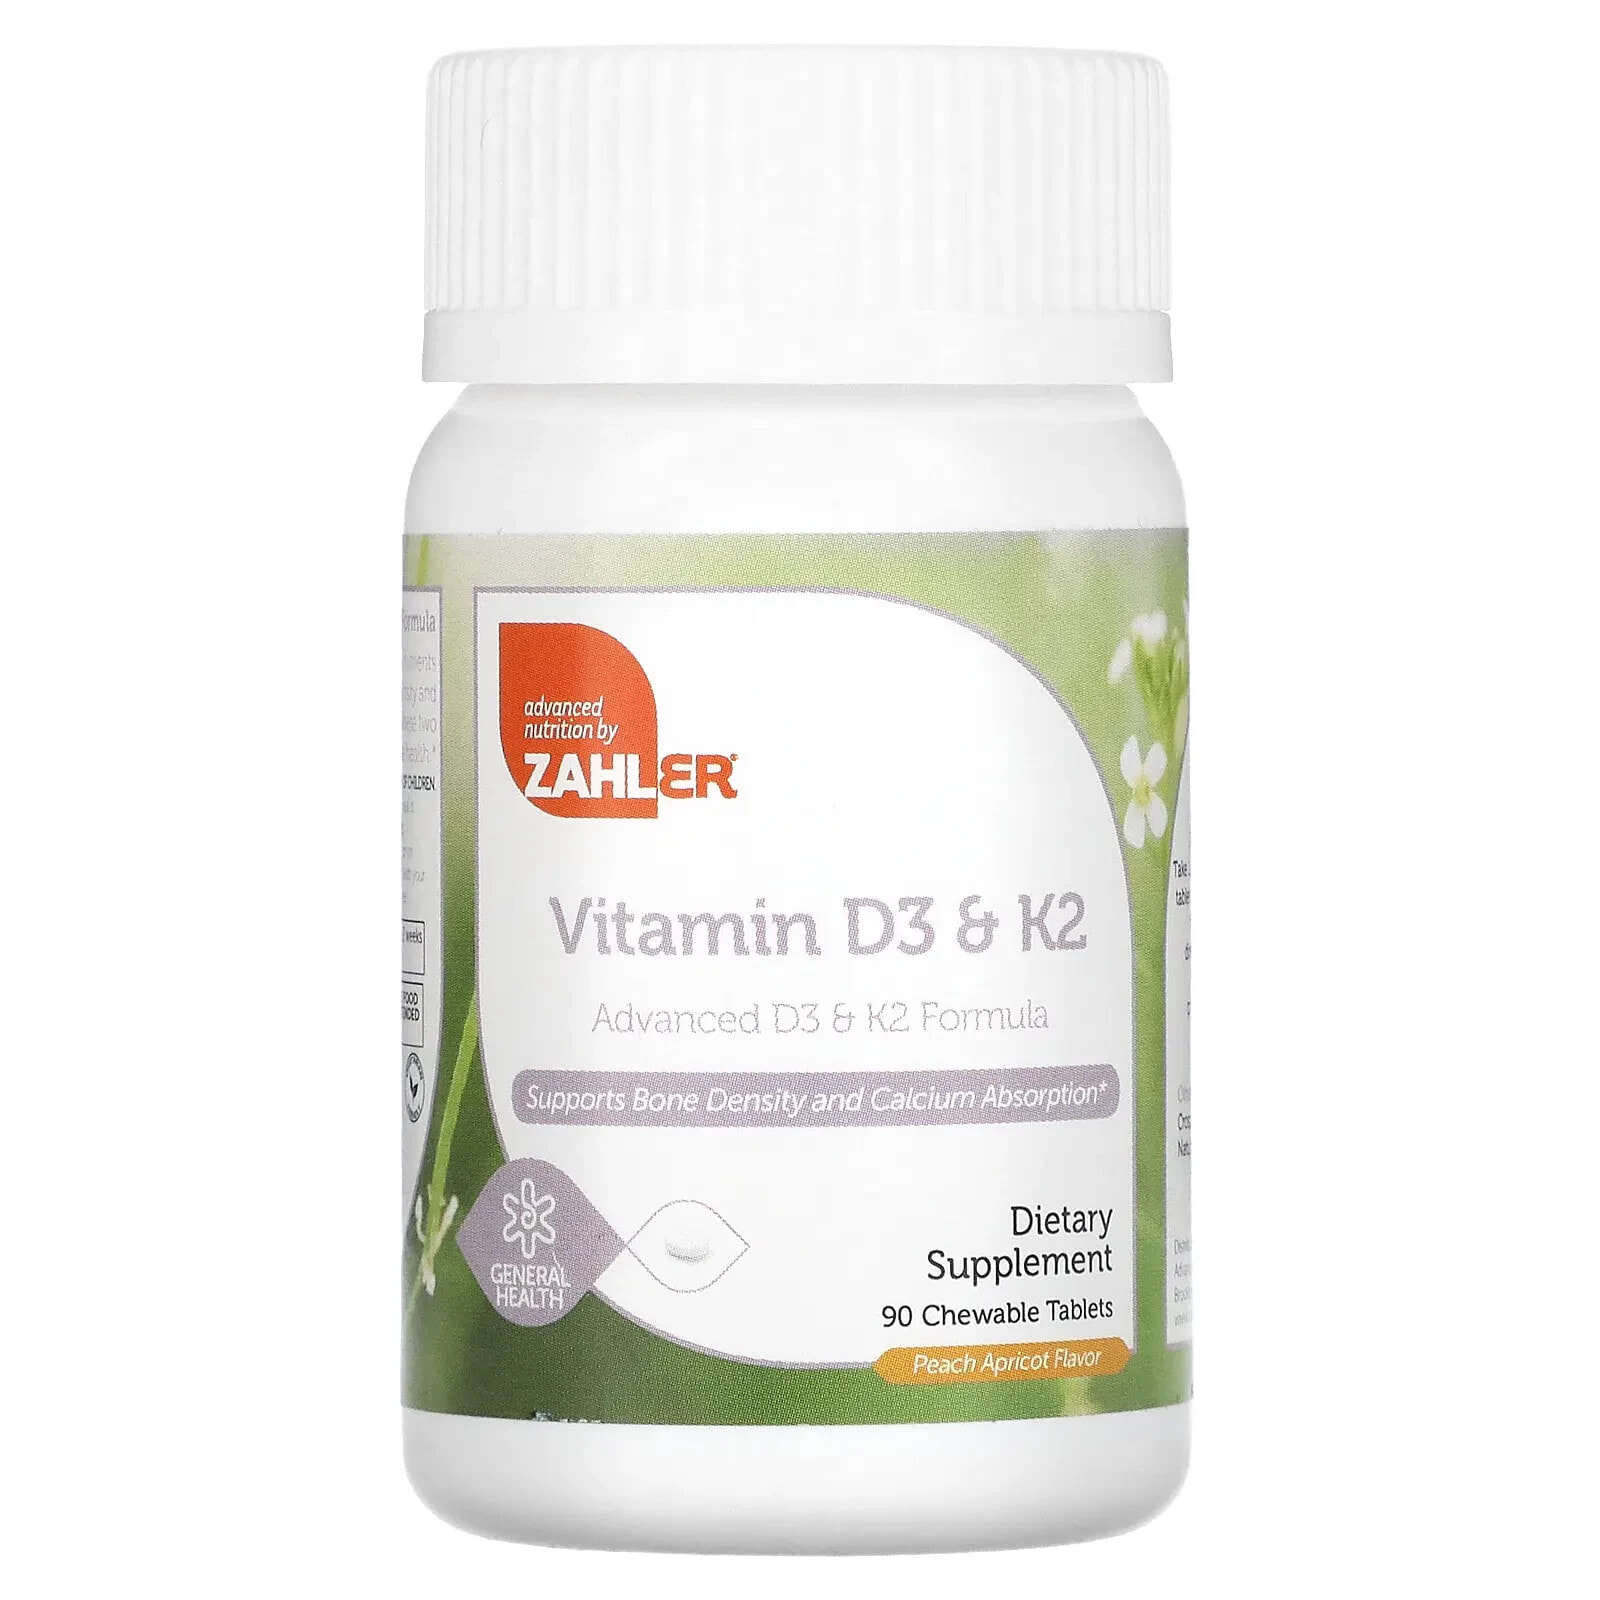 Залер, Vitamin D3 & K2, Peach Apricot, 90 Chewable Tablets